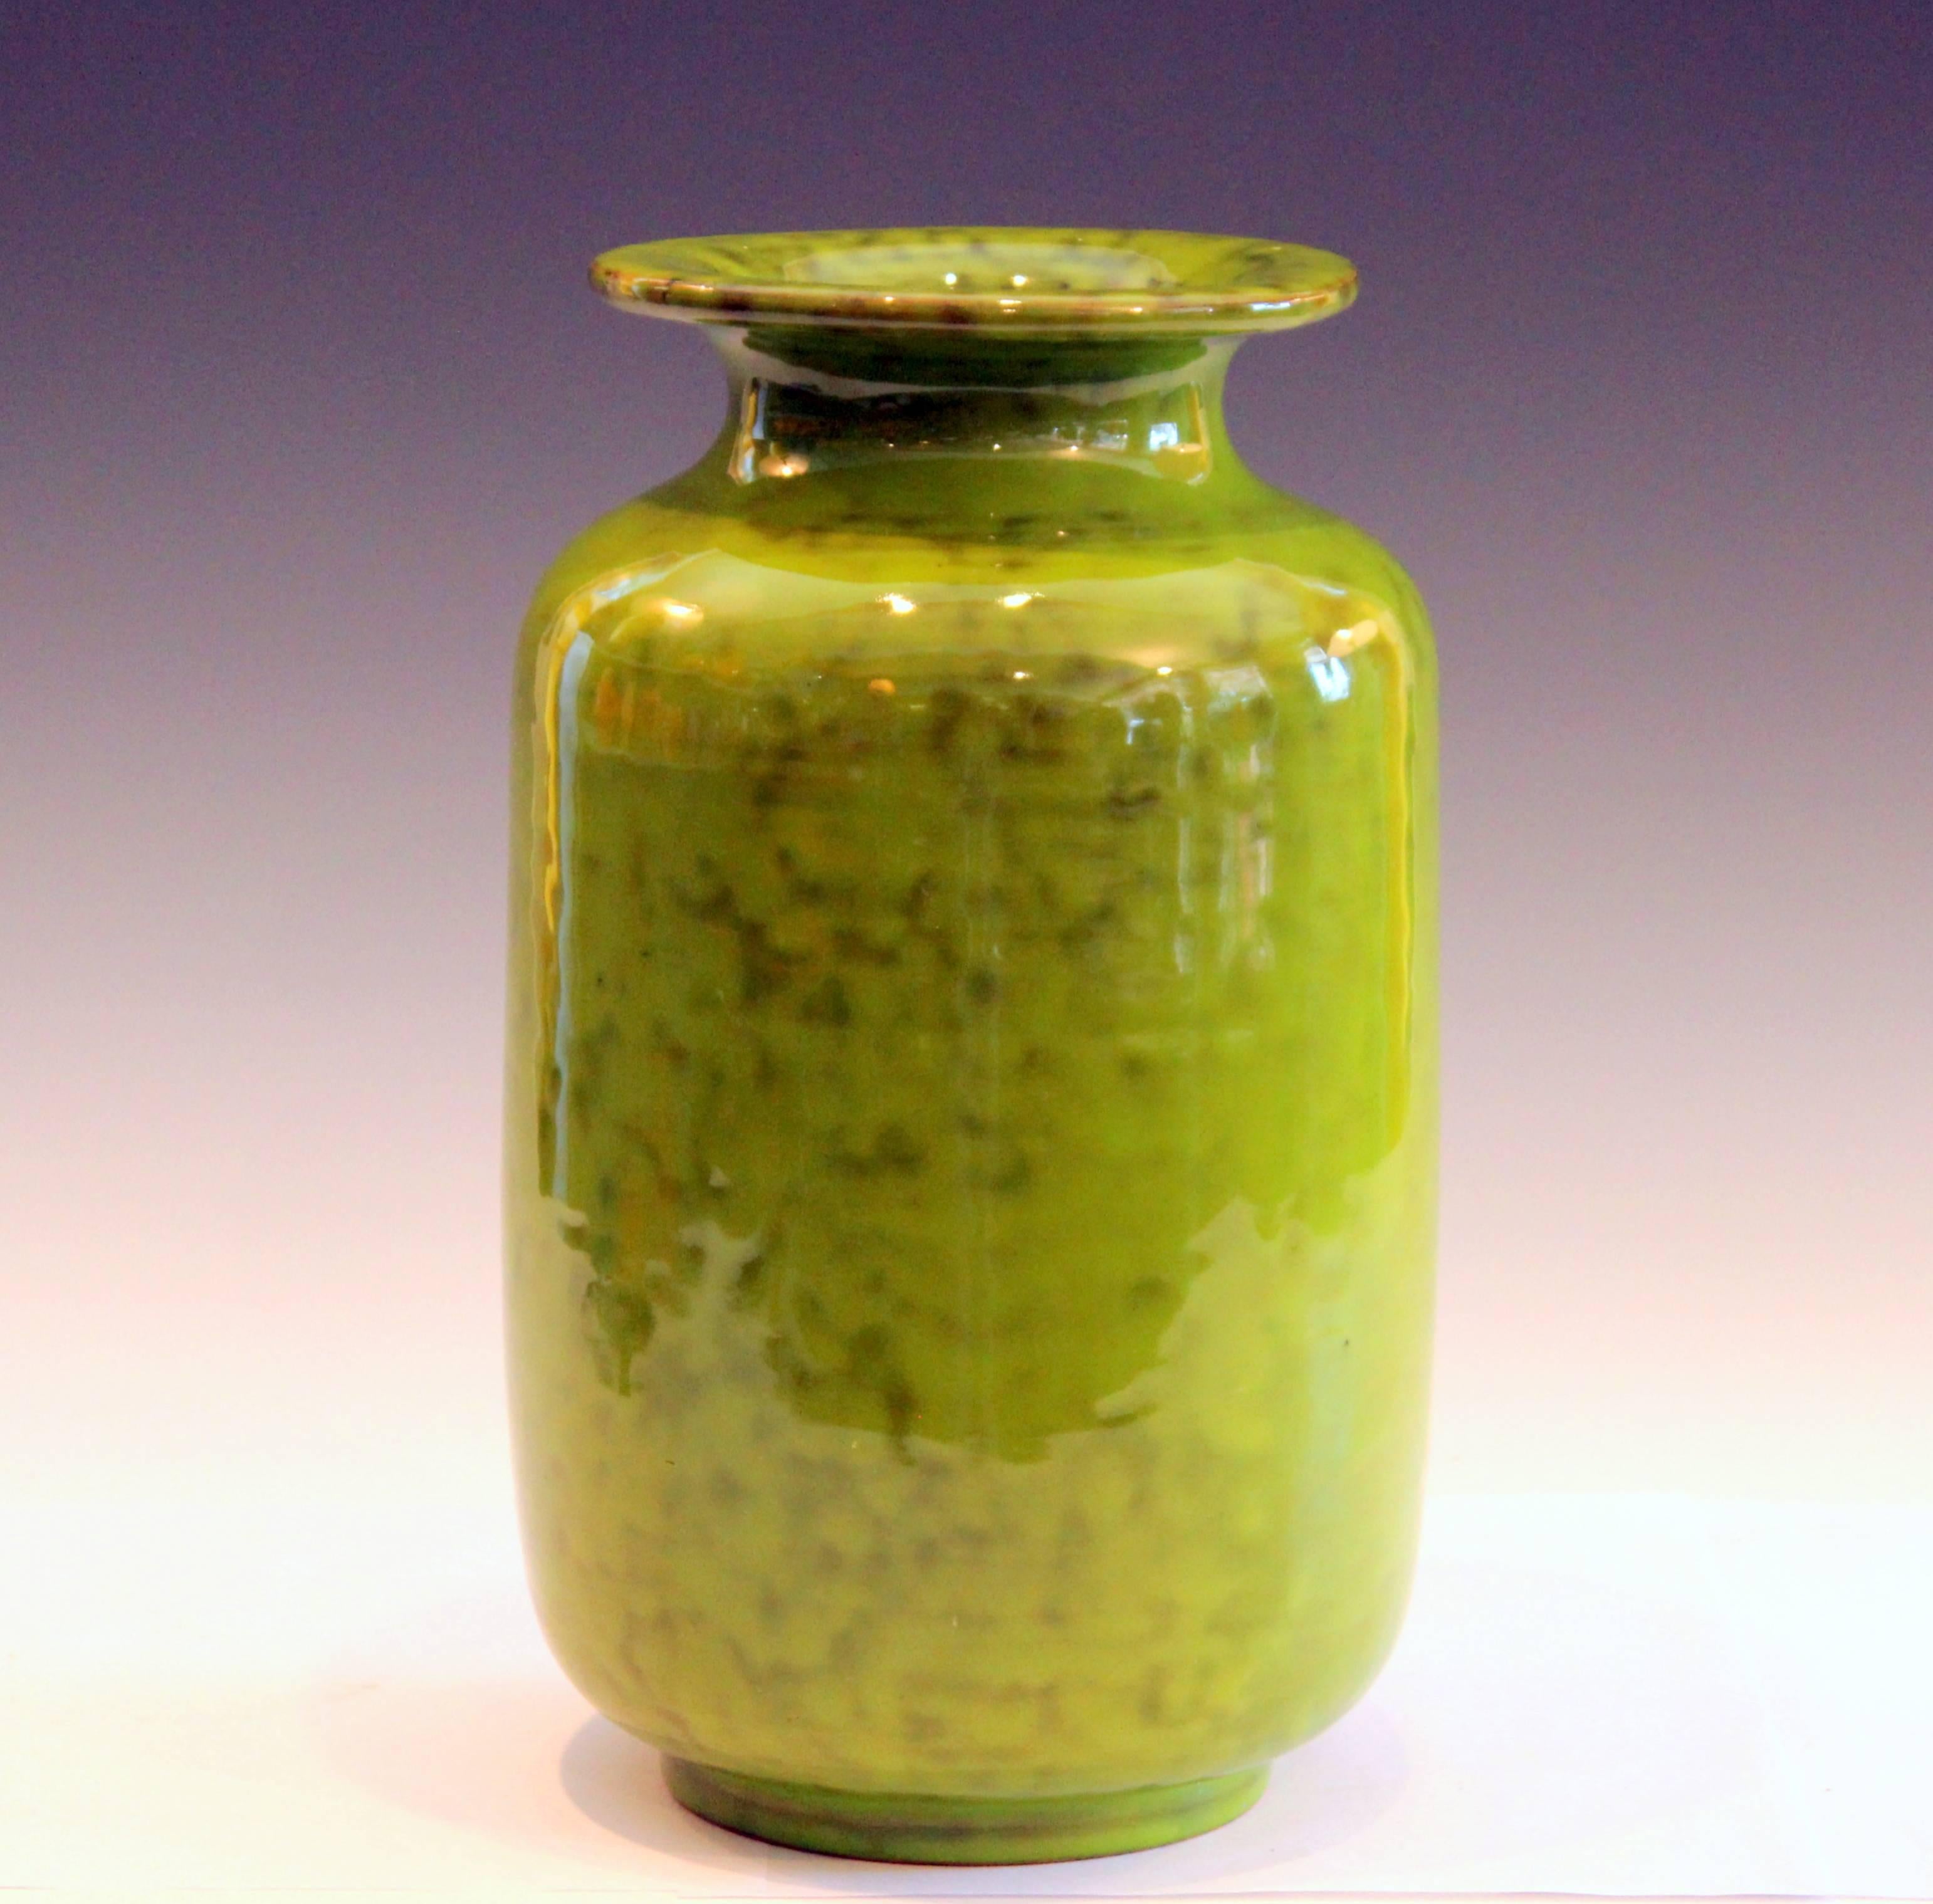 Vintage Italian pottery Rouleau form vase in mottled pistachio green glaze, circa 1960s. Attributed to Italica Ars for the PV distributor. Measures: 11 1/4